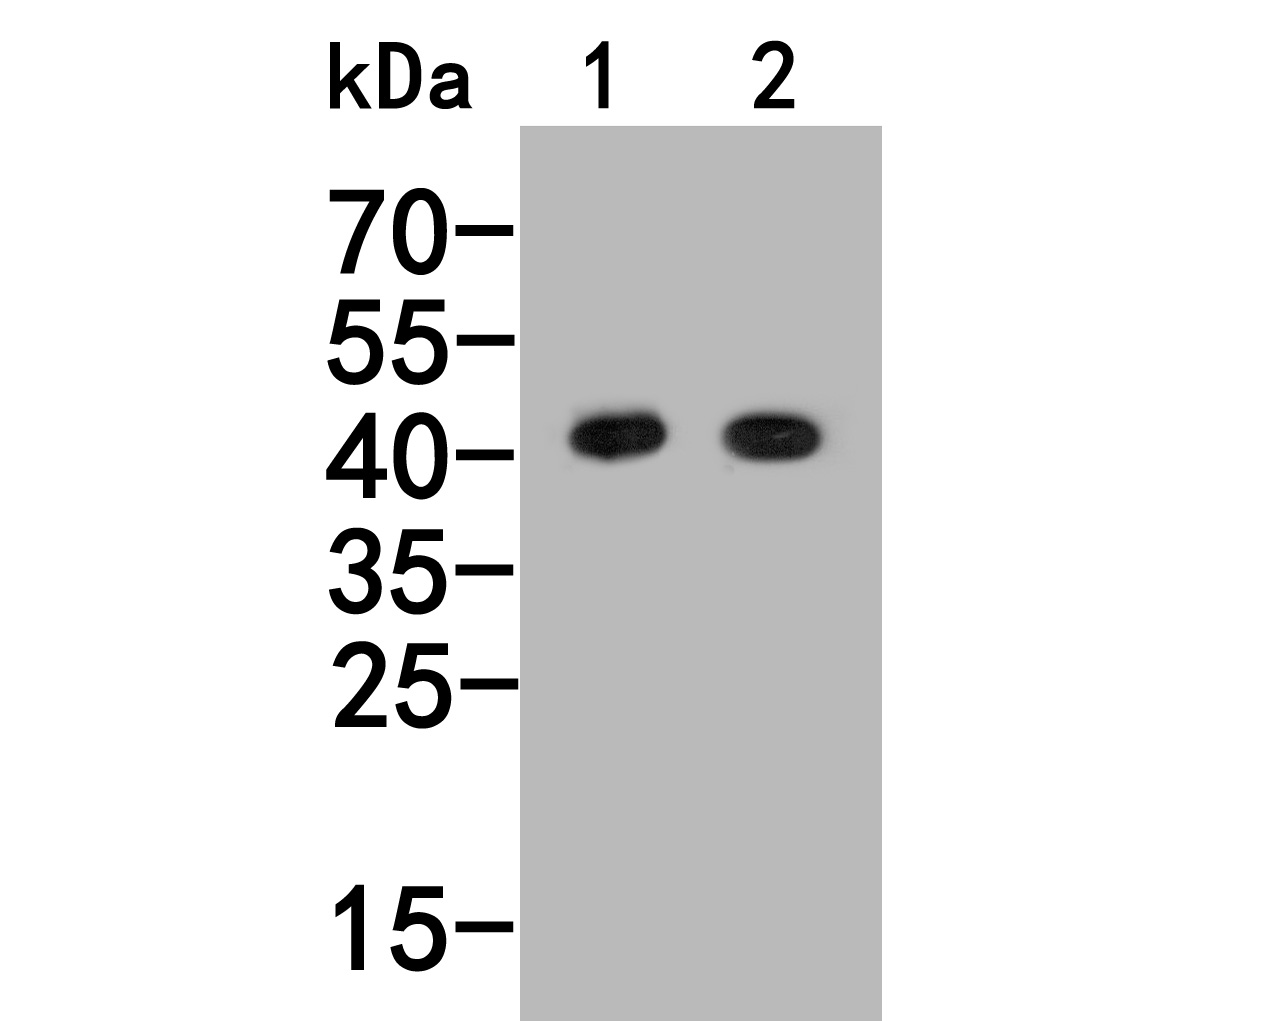 Western blot analysis of Histamine H2 receptor on different lysates. Proteins were transferred to a PVDF membrane and blocked with 5% BSA in PBS for 1 hour at room temperature. The primary antibody (HA500154, 1/1,000) was used in 5% BSA at room temperature for 2 hours. Goat Anti-Rabbit IgG - HRP Secondary Antibody (HA1001) at 1:200,000 dilution was used for 1 hour at room temperature.<br />
Positive control: <br />
Lane 1: PC-3M cell lysate<br />
Lane 2: SHSY5Y cell lysate